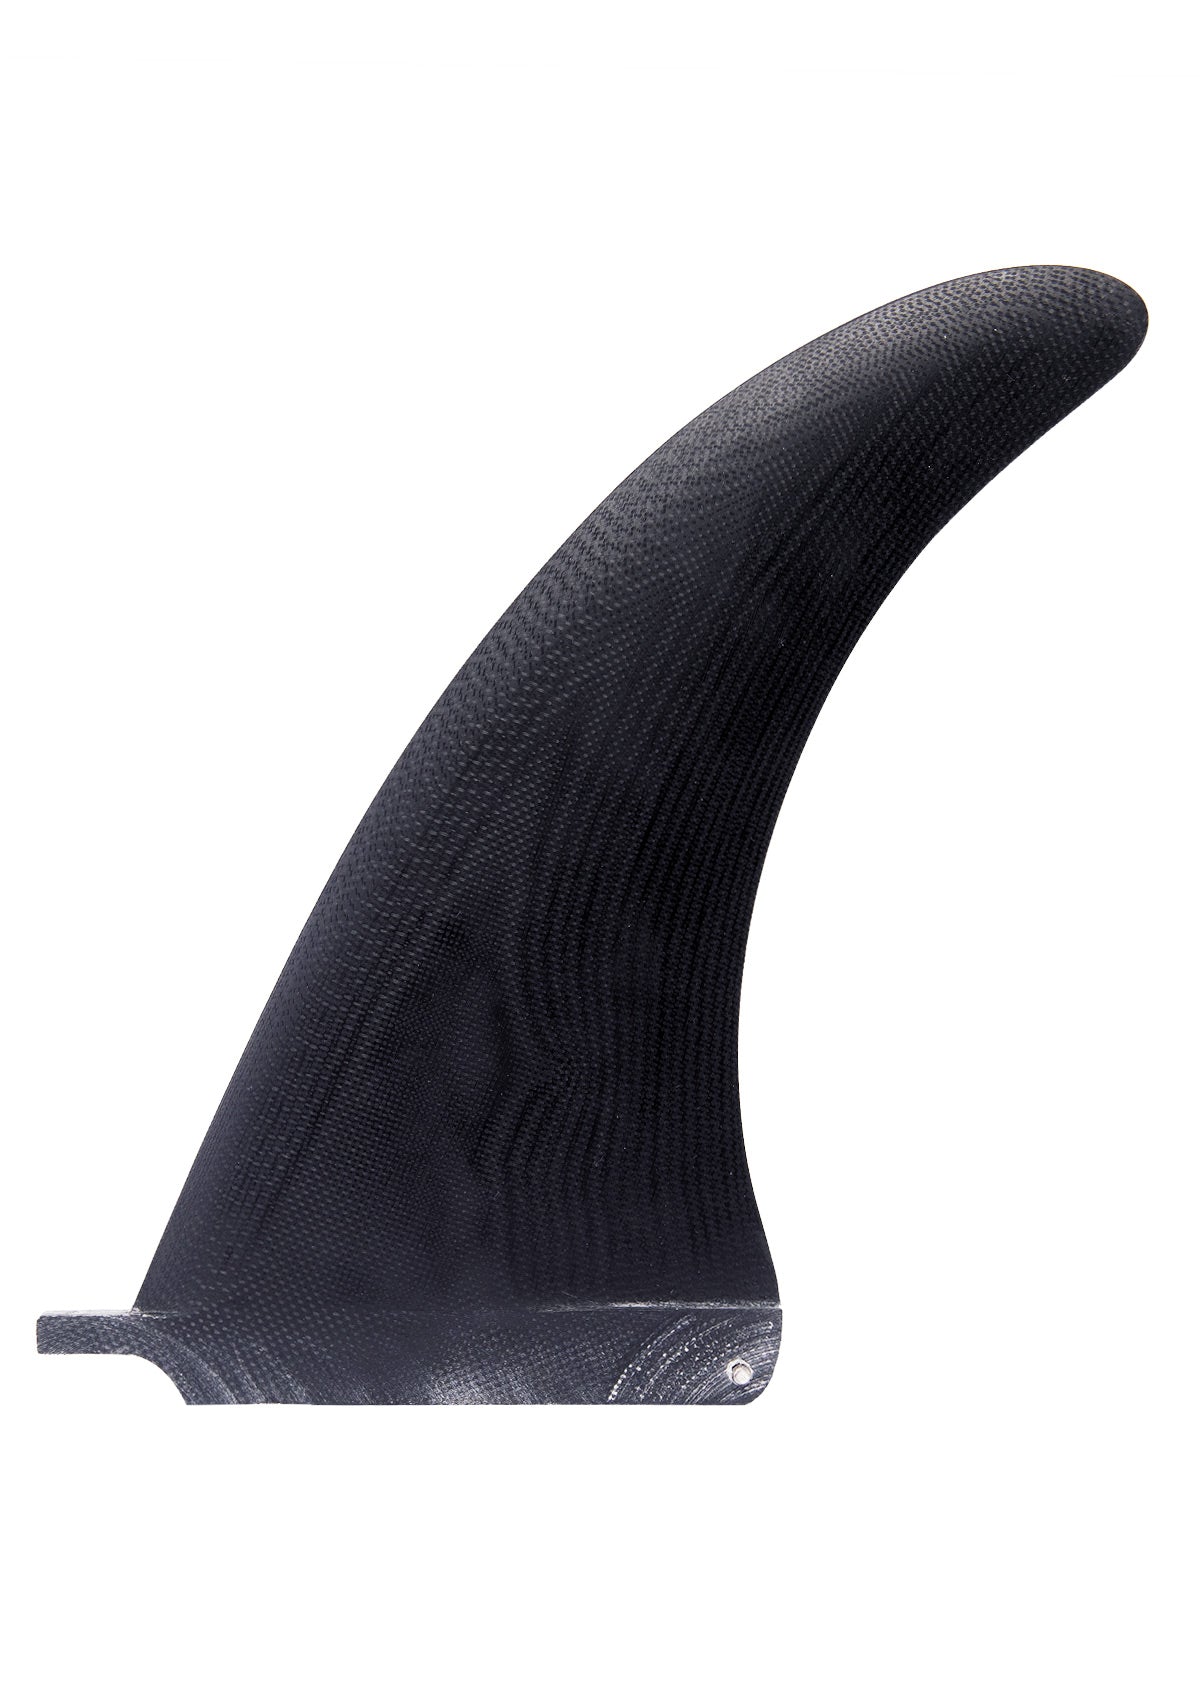 needessentials 9 inch hand foiled fibre glass surfing raked single upright fin torren martyn 